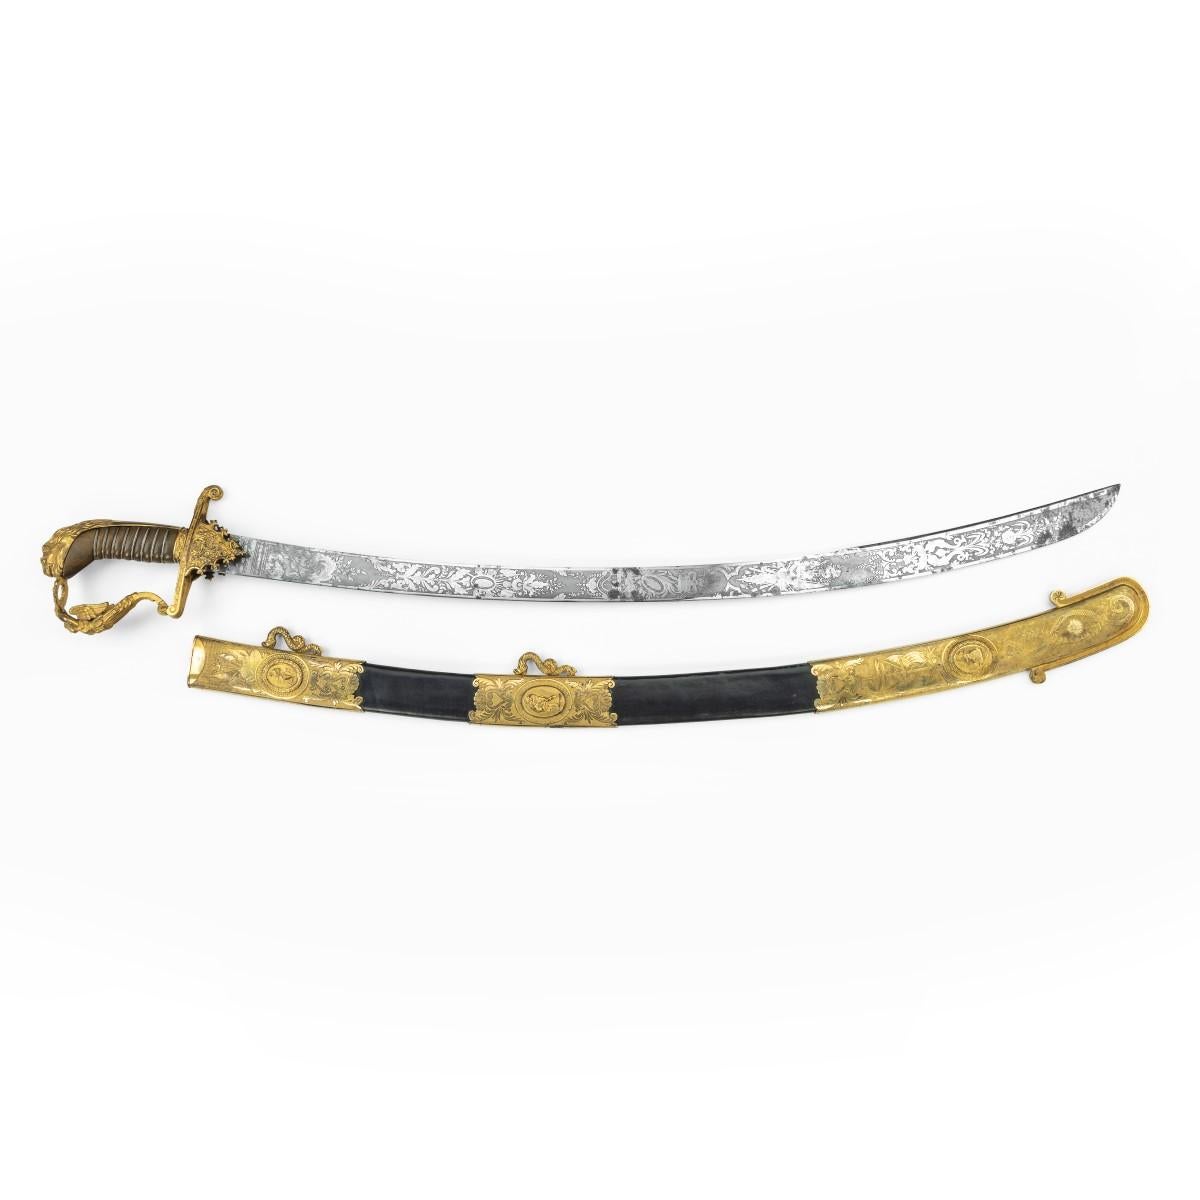 A fine presentation sword given to Lieutenant Charles Peake as a token of gratitude by the Men of His Ship when recommissioned for Foreign Service in 1821, the citation reading, the curved hatchet point blade etched along its entire length with